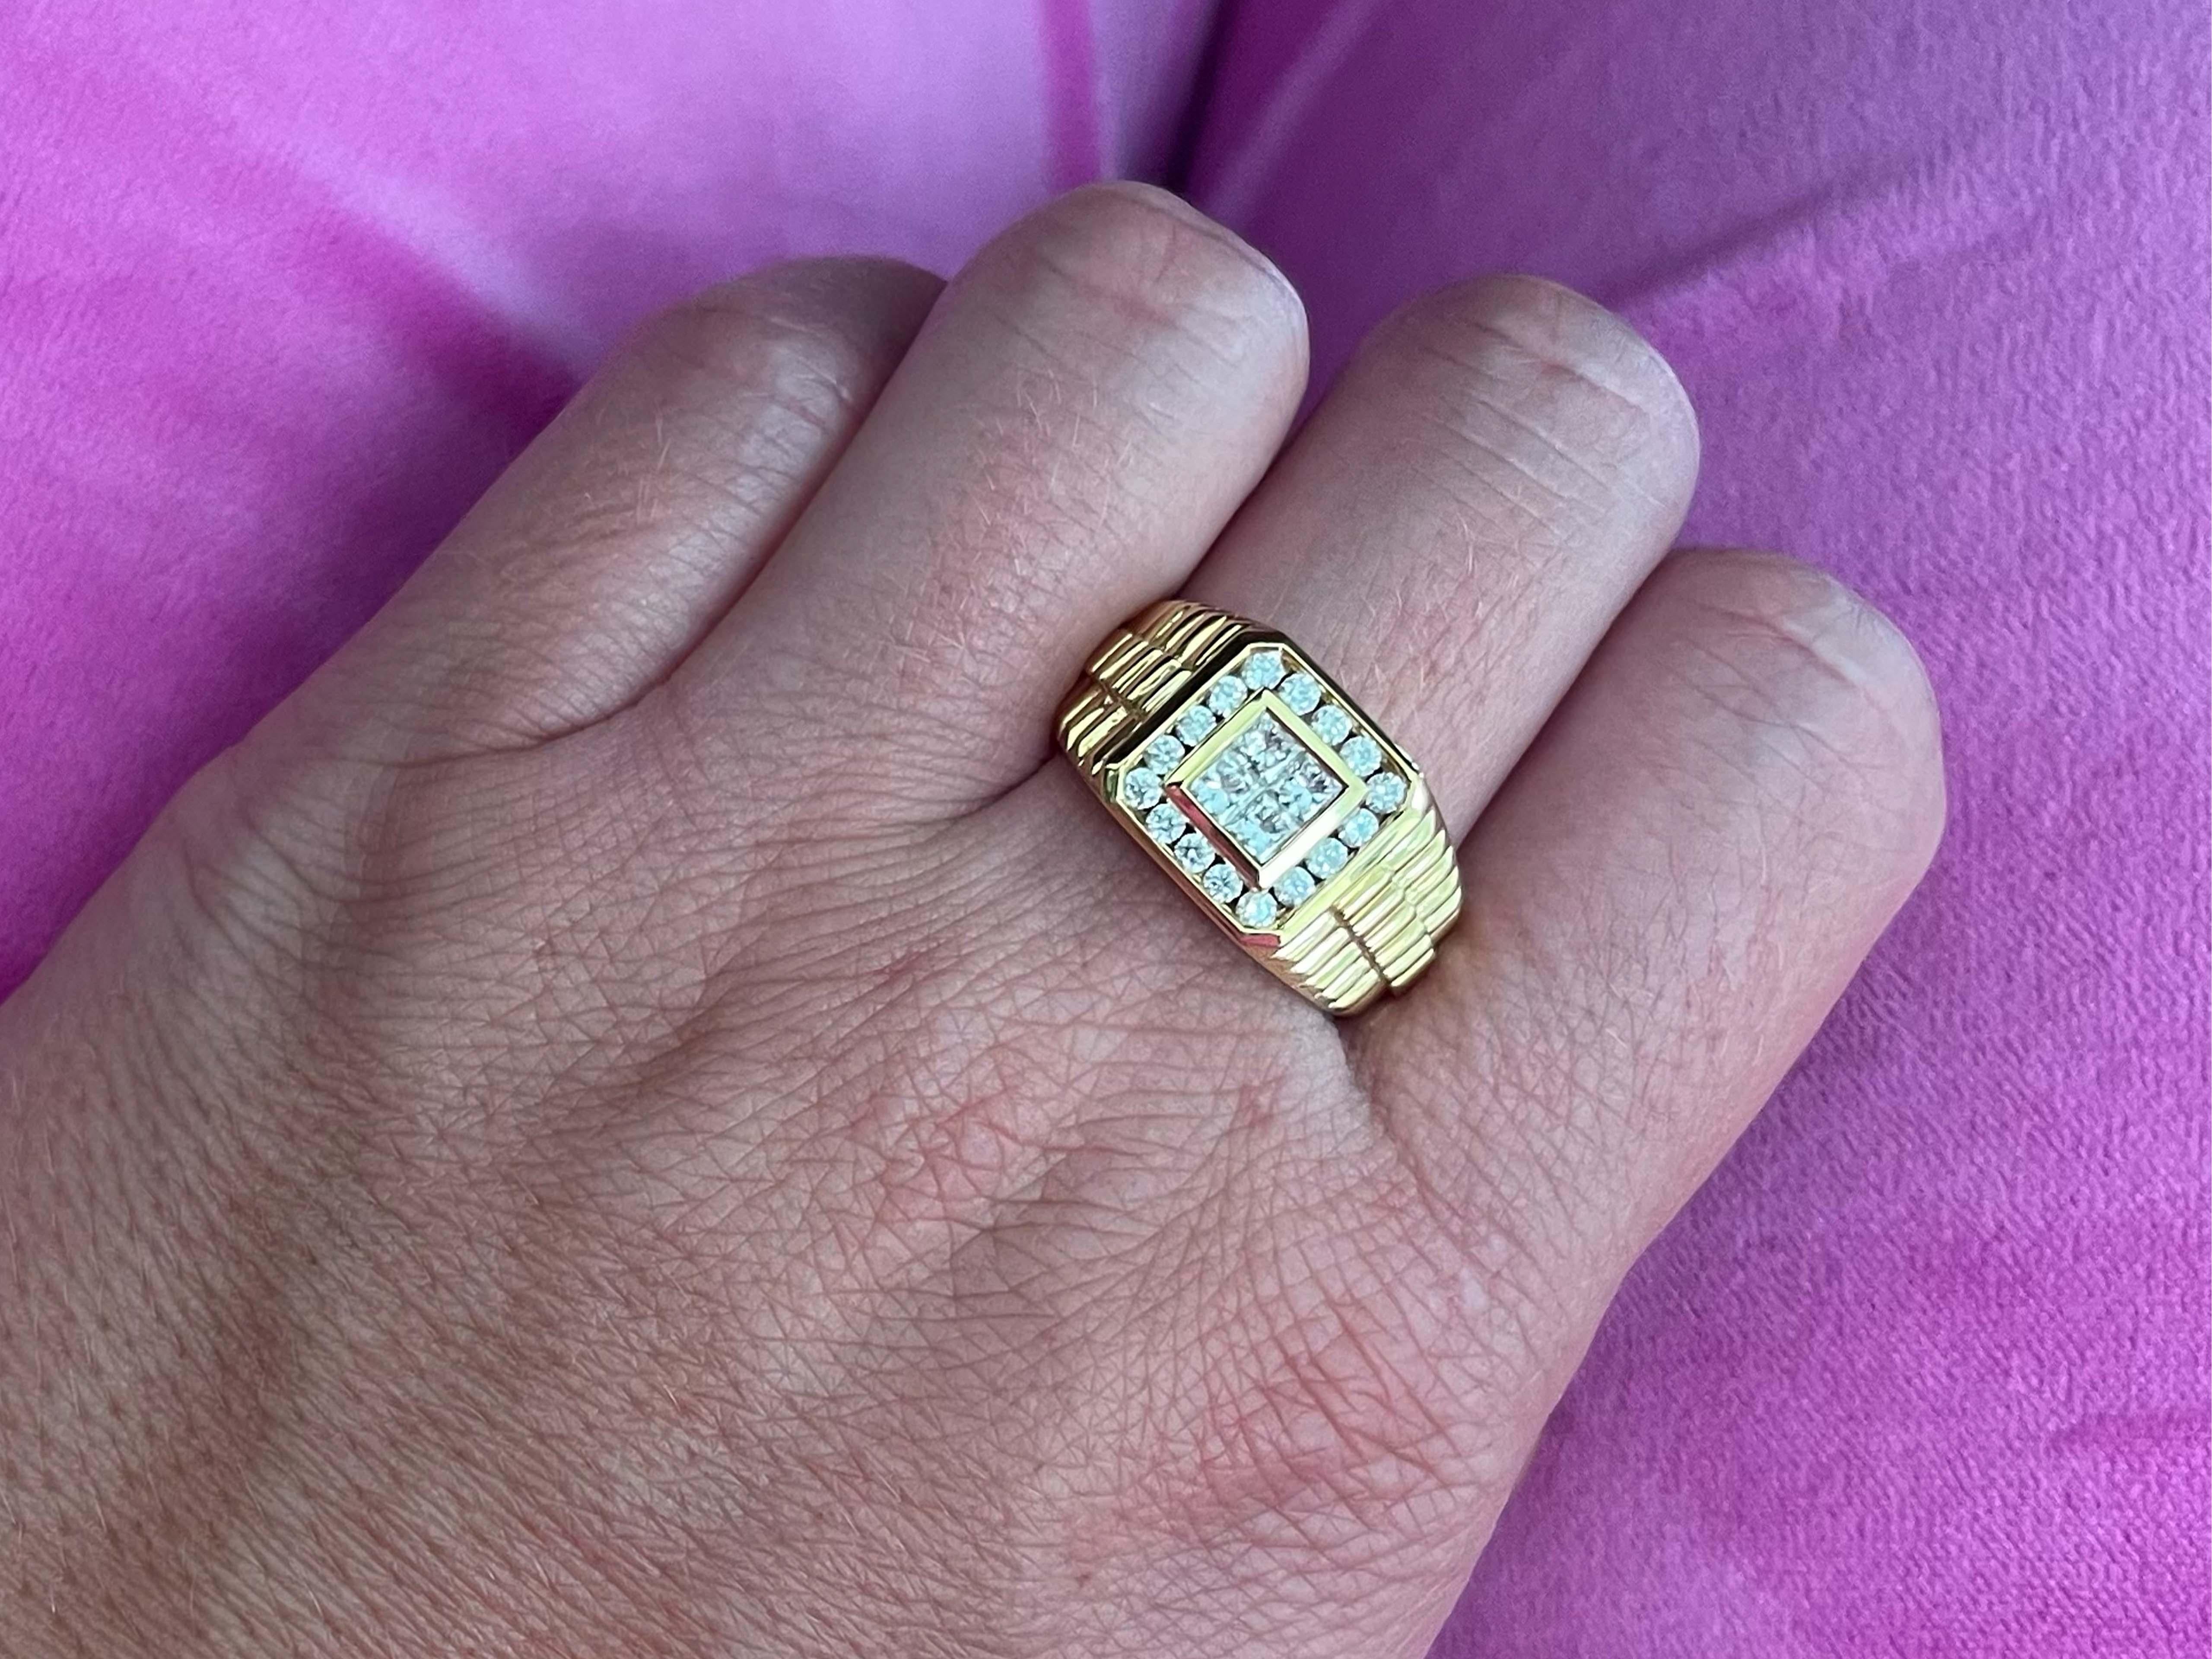 This gorgeous ring features 4 princess cut diamonds bezel set in the center, G color and VS2 clarity totaling 0.50 carats. Around this 4 diamond center is a diamond halo featuring 16, channel set, round brilliant cut diamonds forming a square shape.